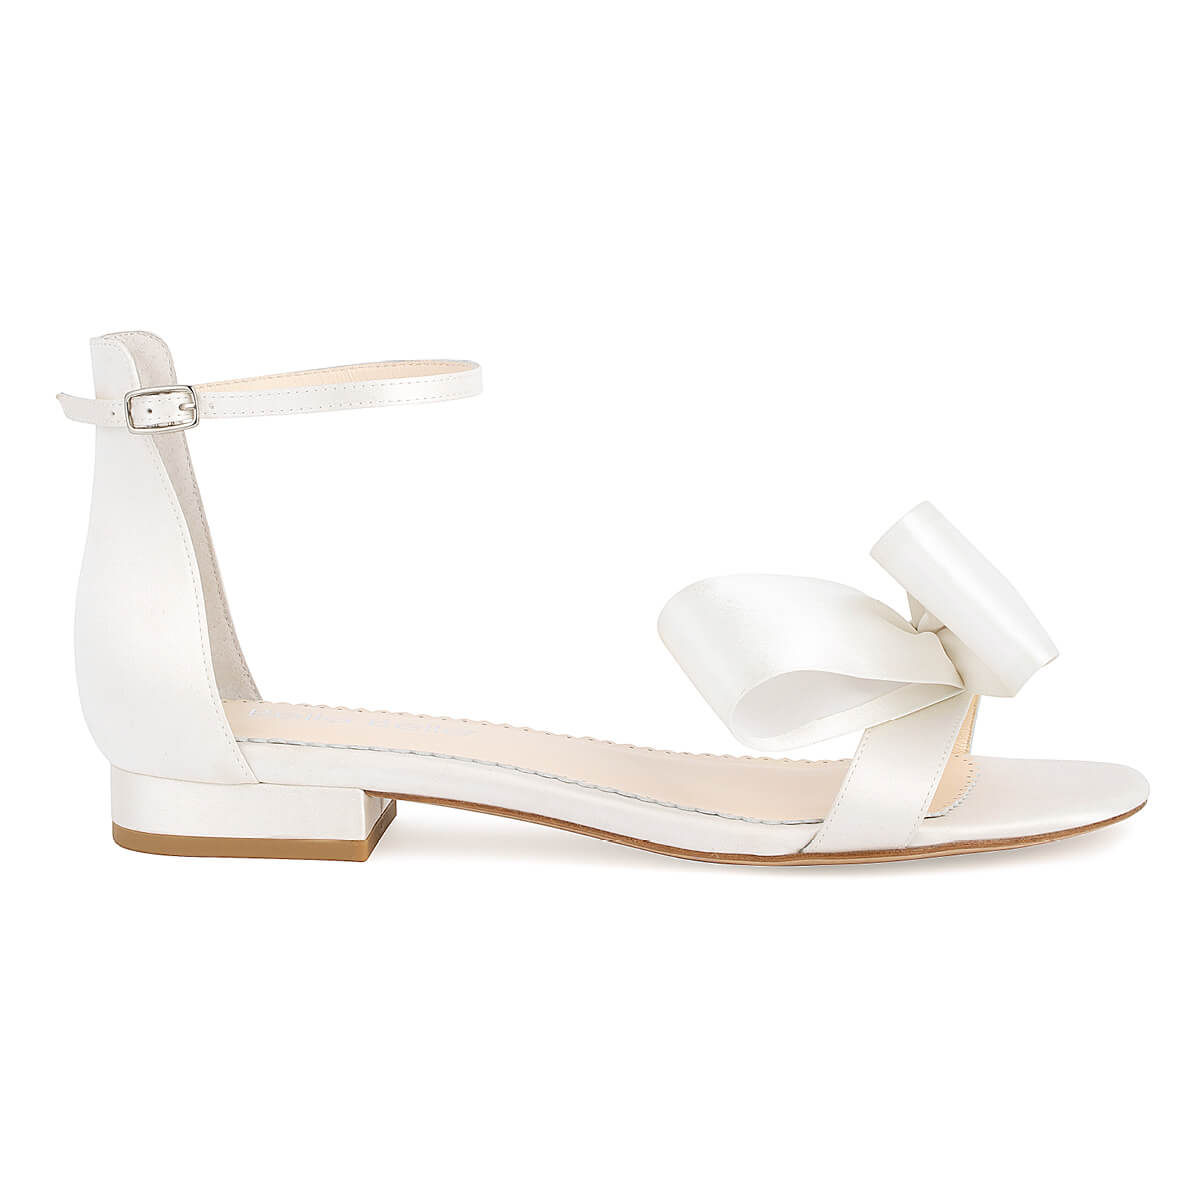 Bella Belle Shoes Zora Open Toe Bridal Flats With Silk Bow